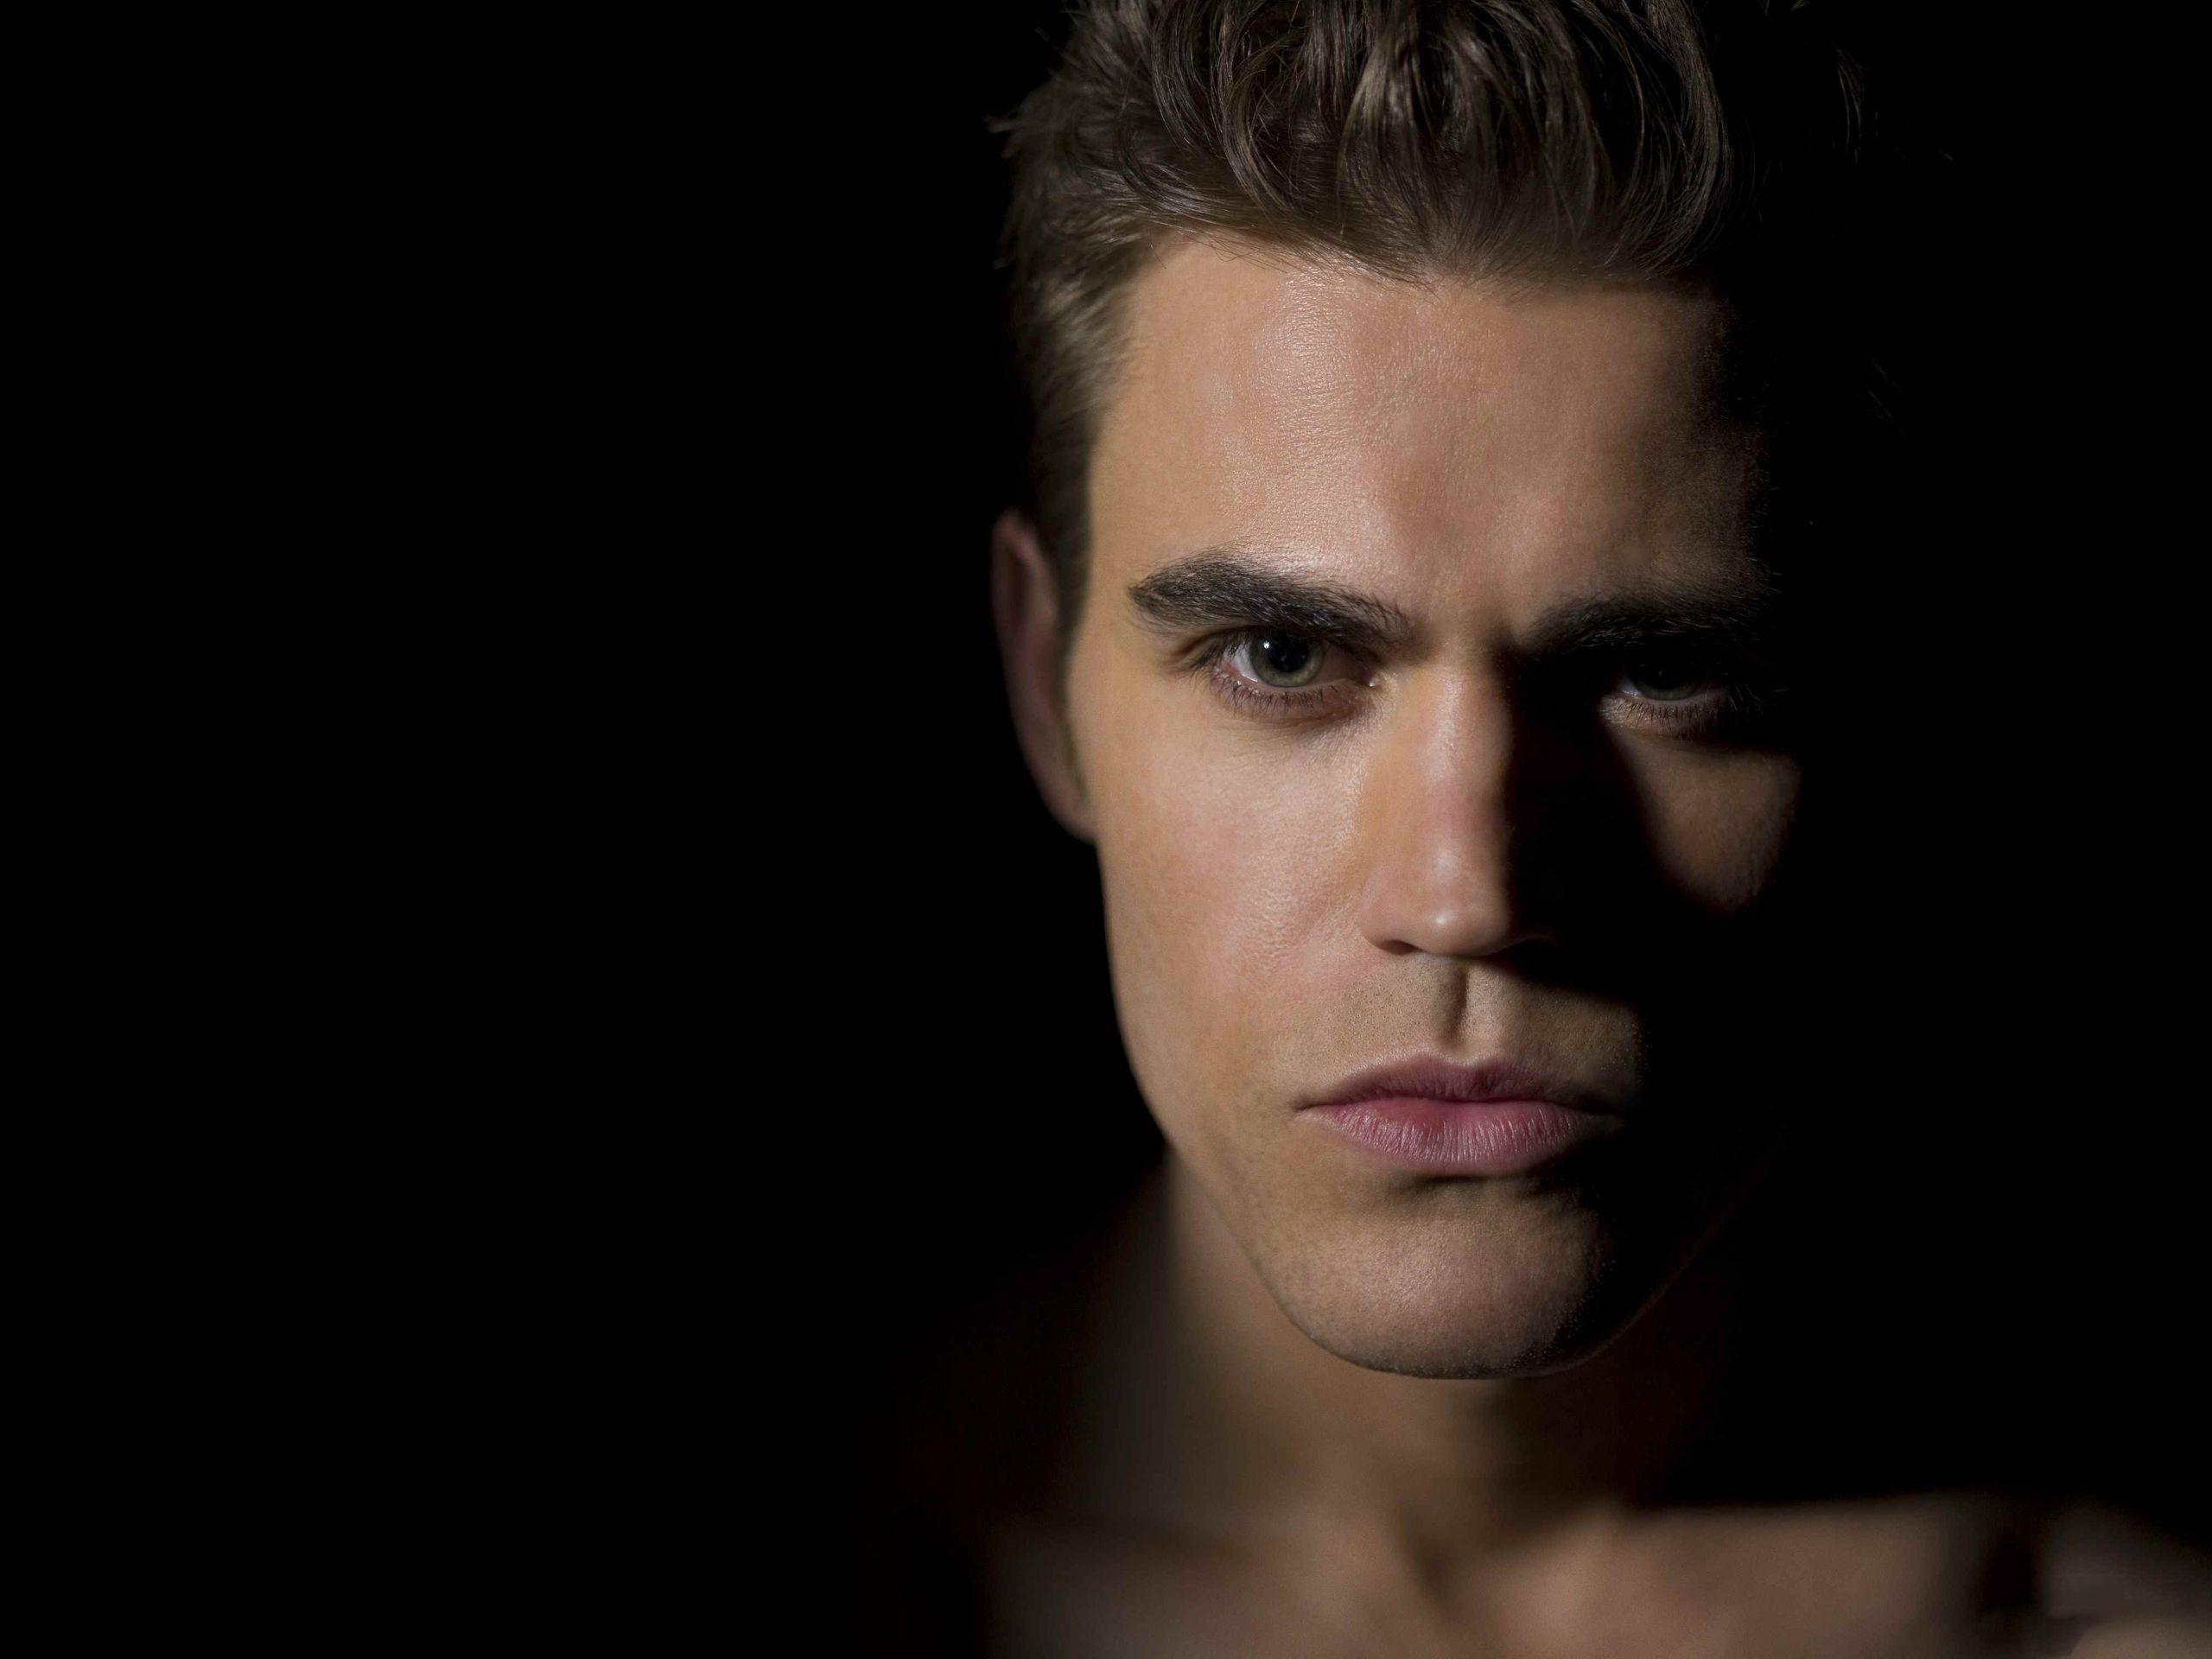 Download Paul Wesley 38774 2560x1920 px High Resolution Wallpapers.